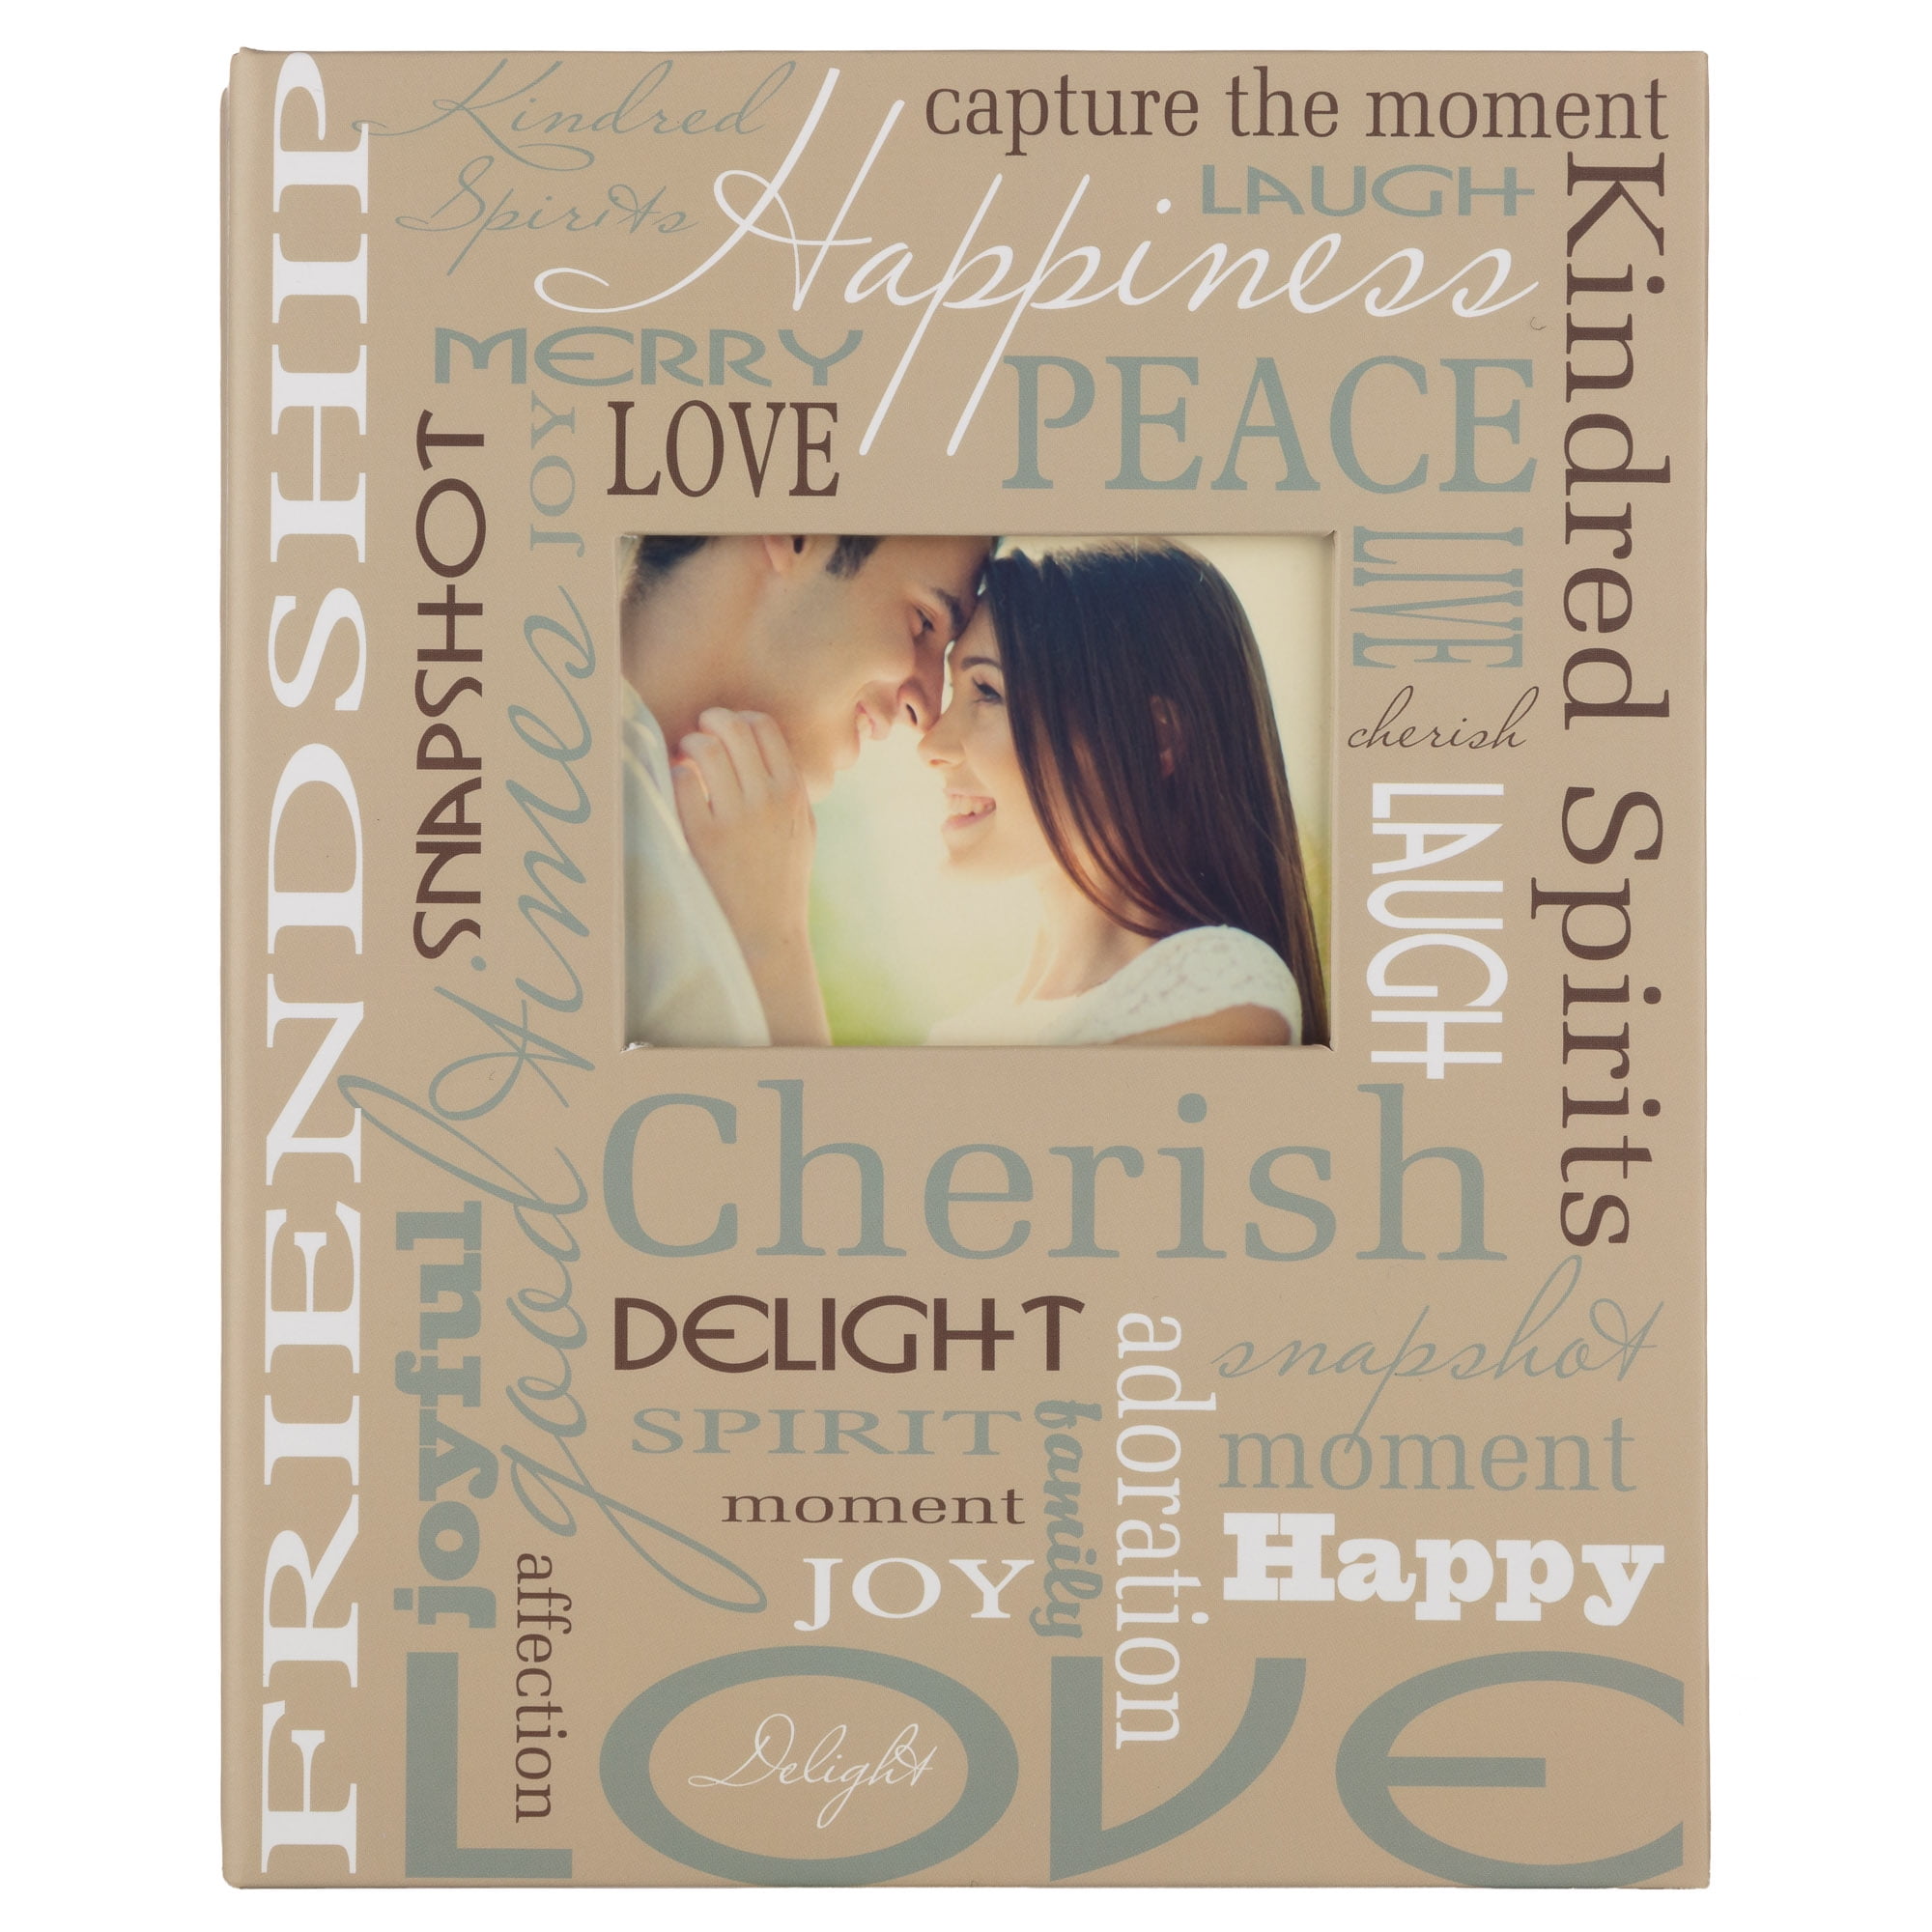 Pinnacle Sentiment Photo Album With Framed Front, Holds 208, 4"x6" Photos